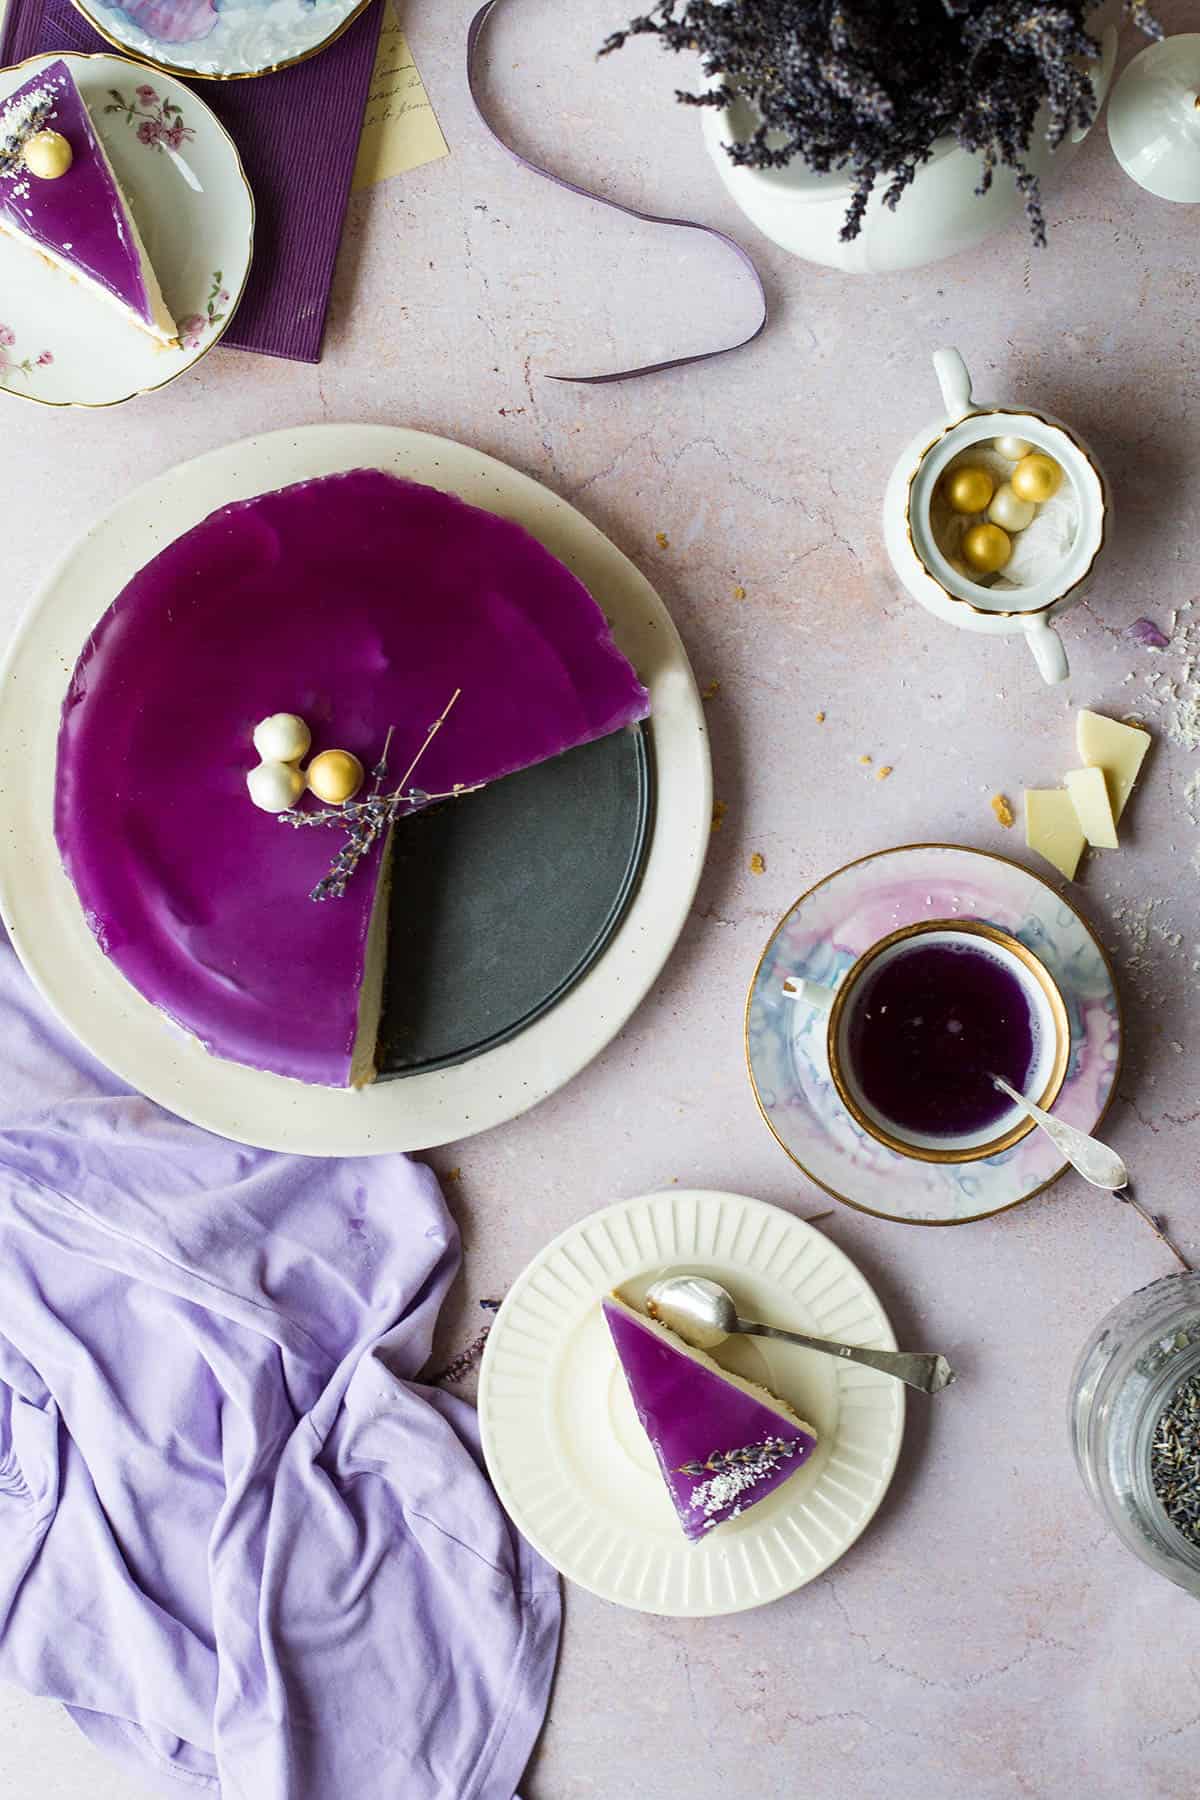 Whole cheesecake with purple jelly lid, three slices taken out of it and put on vintage plates.